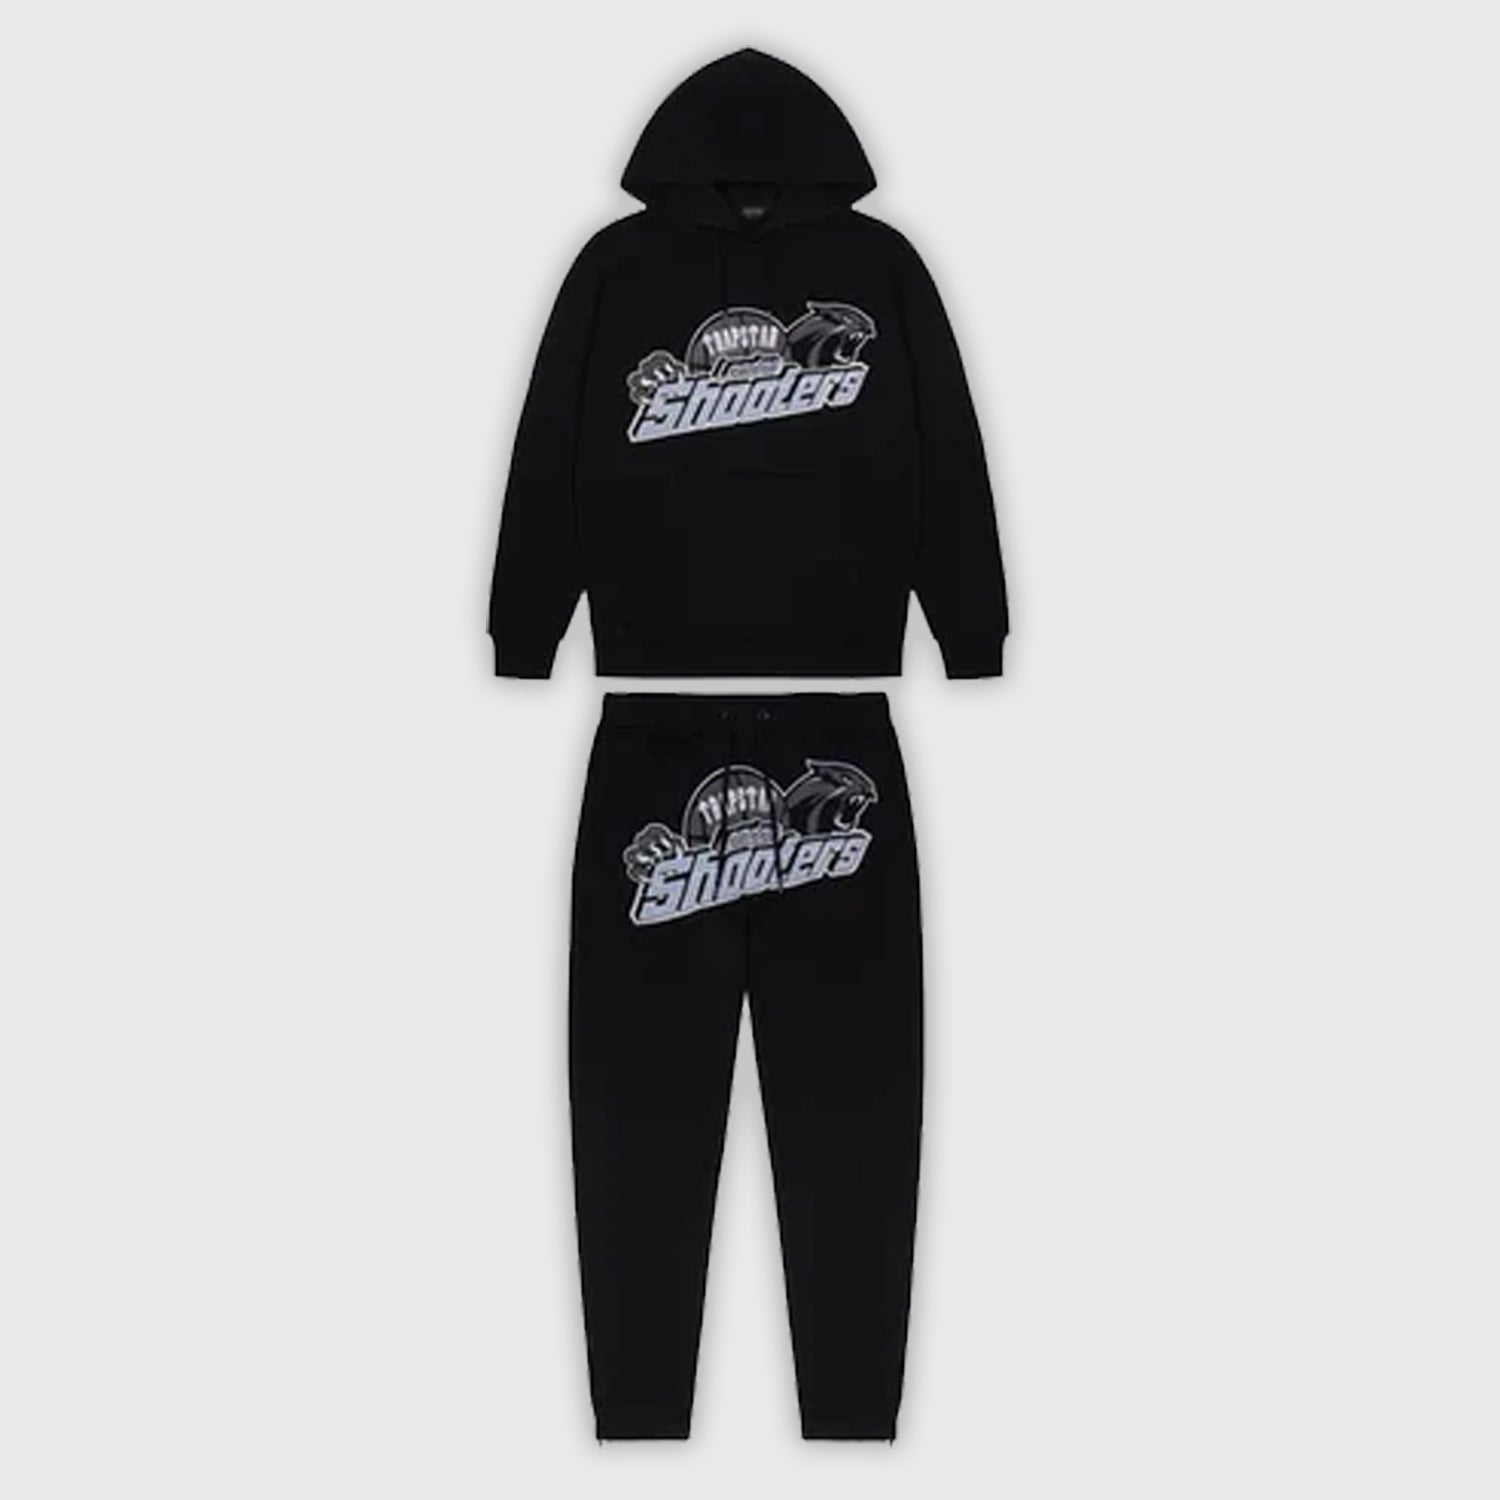 TRAPSTAR SHOOTERS HOODED TRACKSUIT BLACK ICE BLUE KICKKONNECT